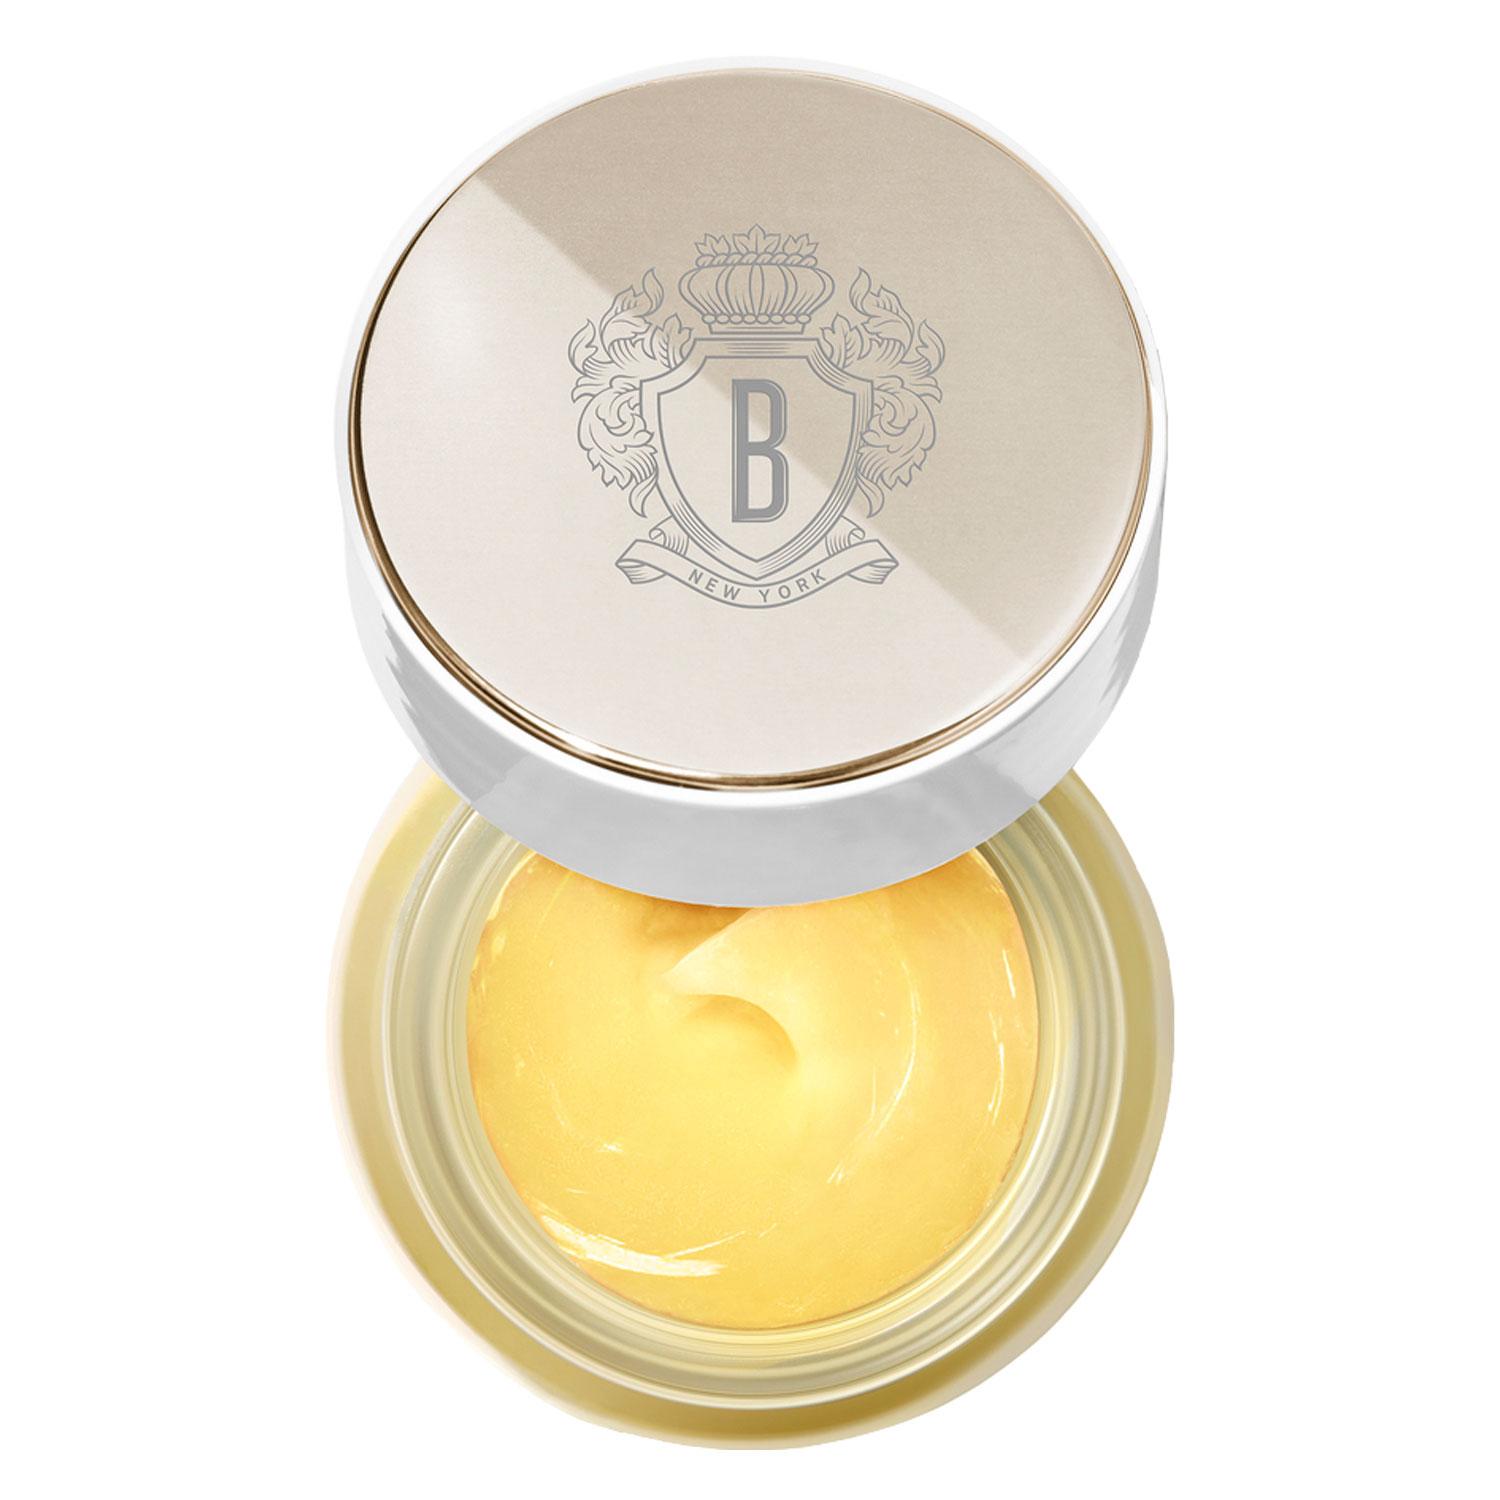 BB Skincare - EXTRA Cleansing Balm